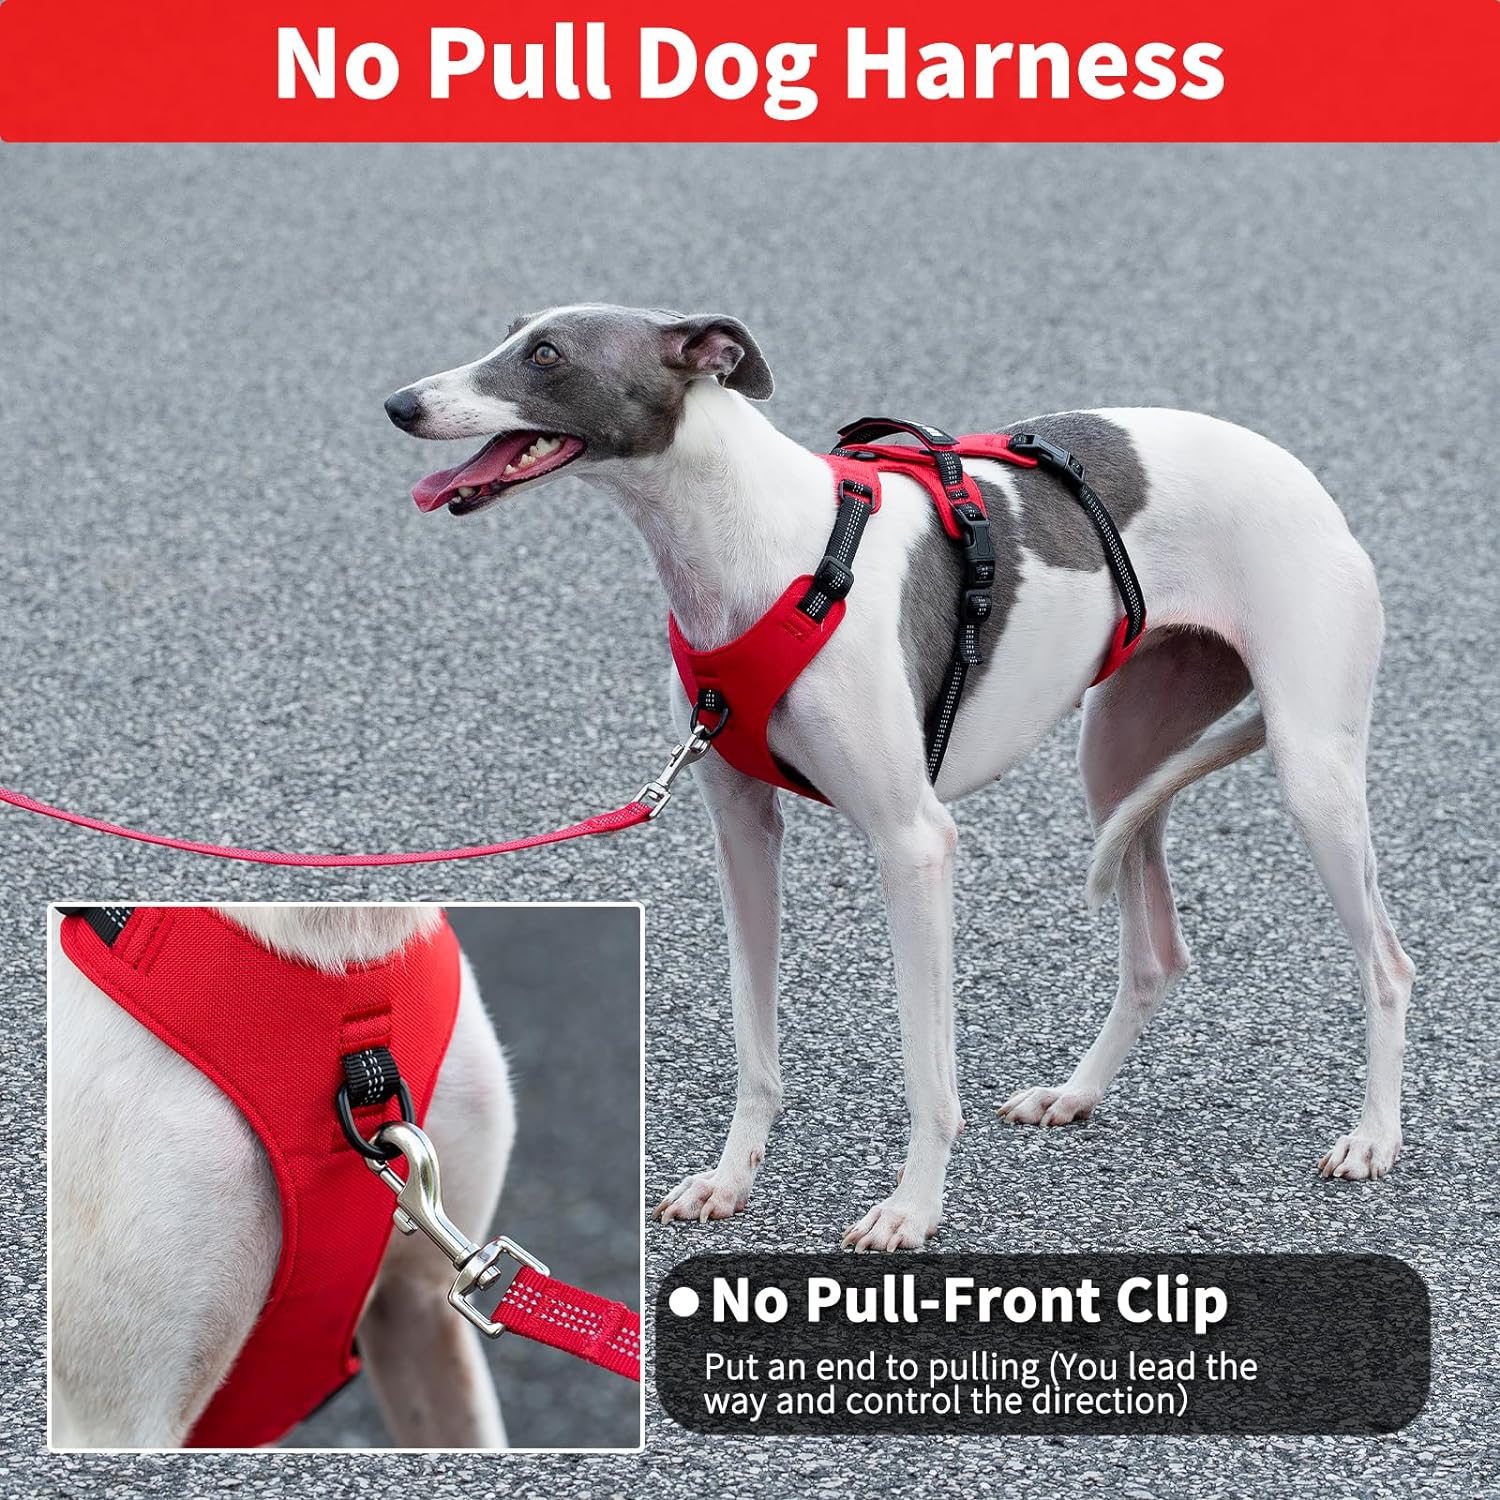 Escape Proof Dog Harness, No Pull Dog Harness, Service Dog Harness with Handle(Red)